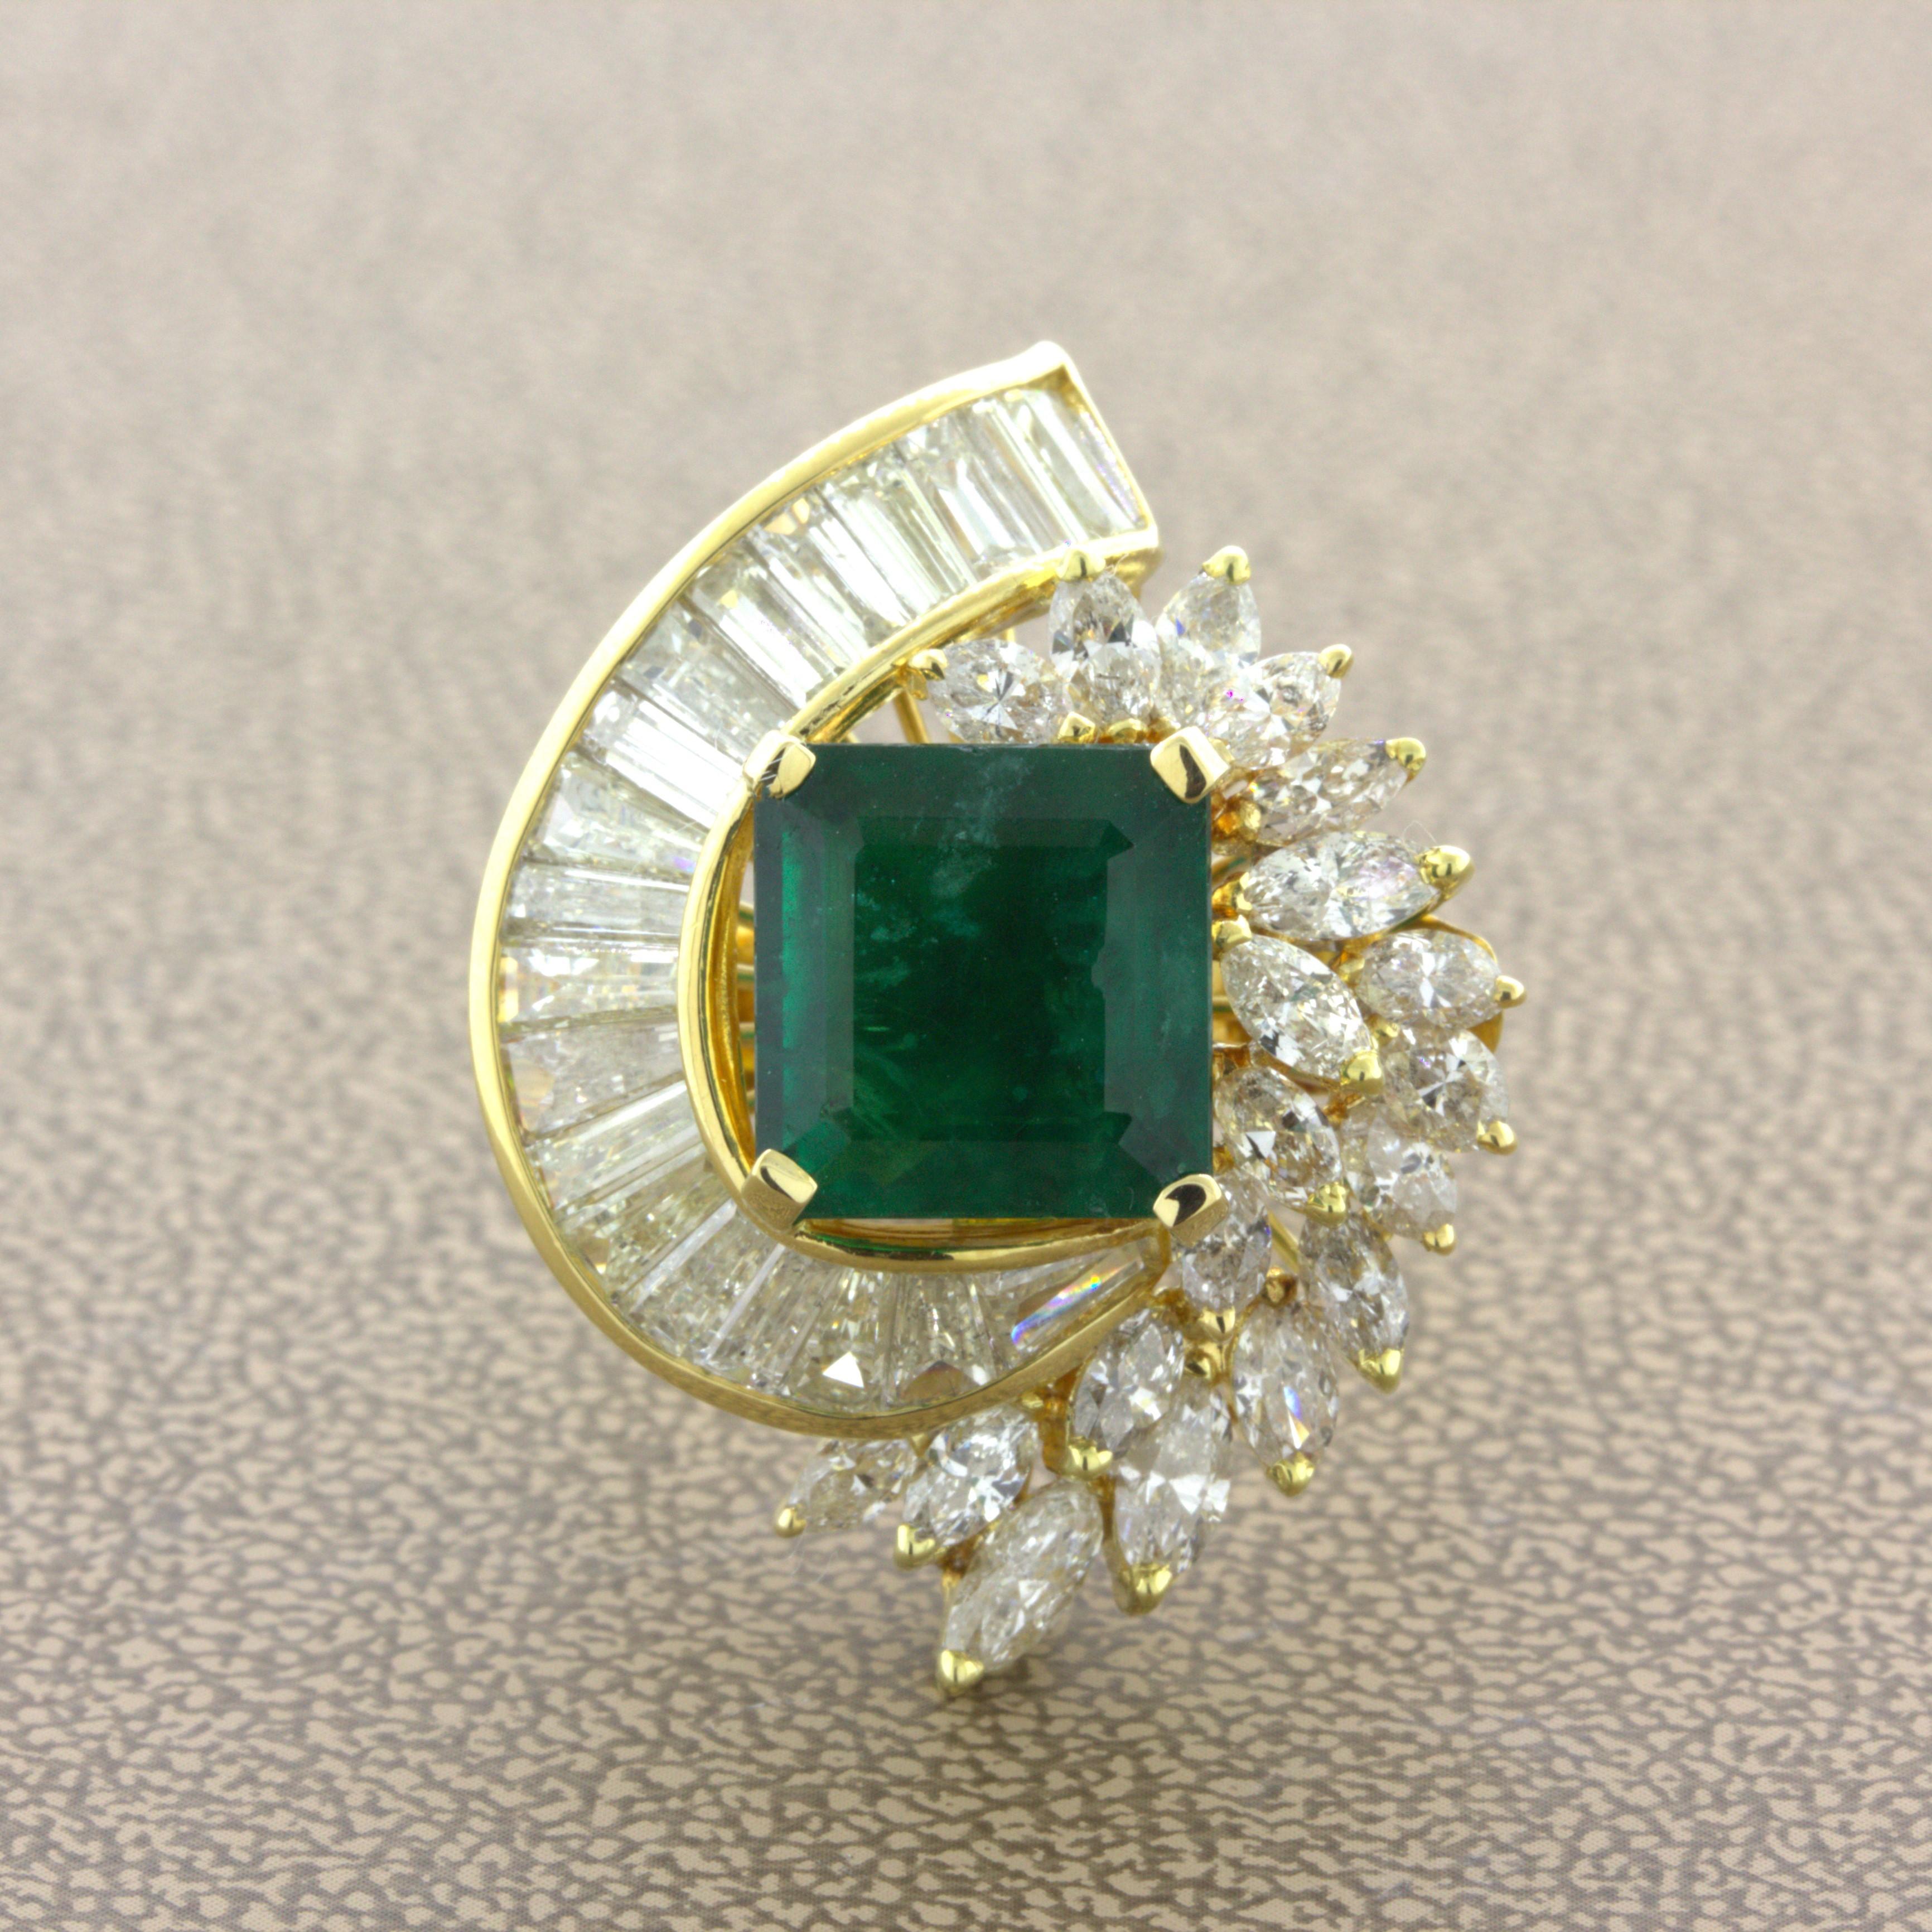 A chic and elegant gemstone and diamond ring from the 1970’s that can also be worn as a pendant. It features a 5.76 carat square-shape emerald with a deep vivid green color. Surrounding the emerald and running around the ring is a cascade of